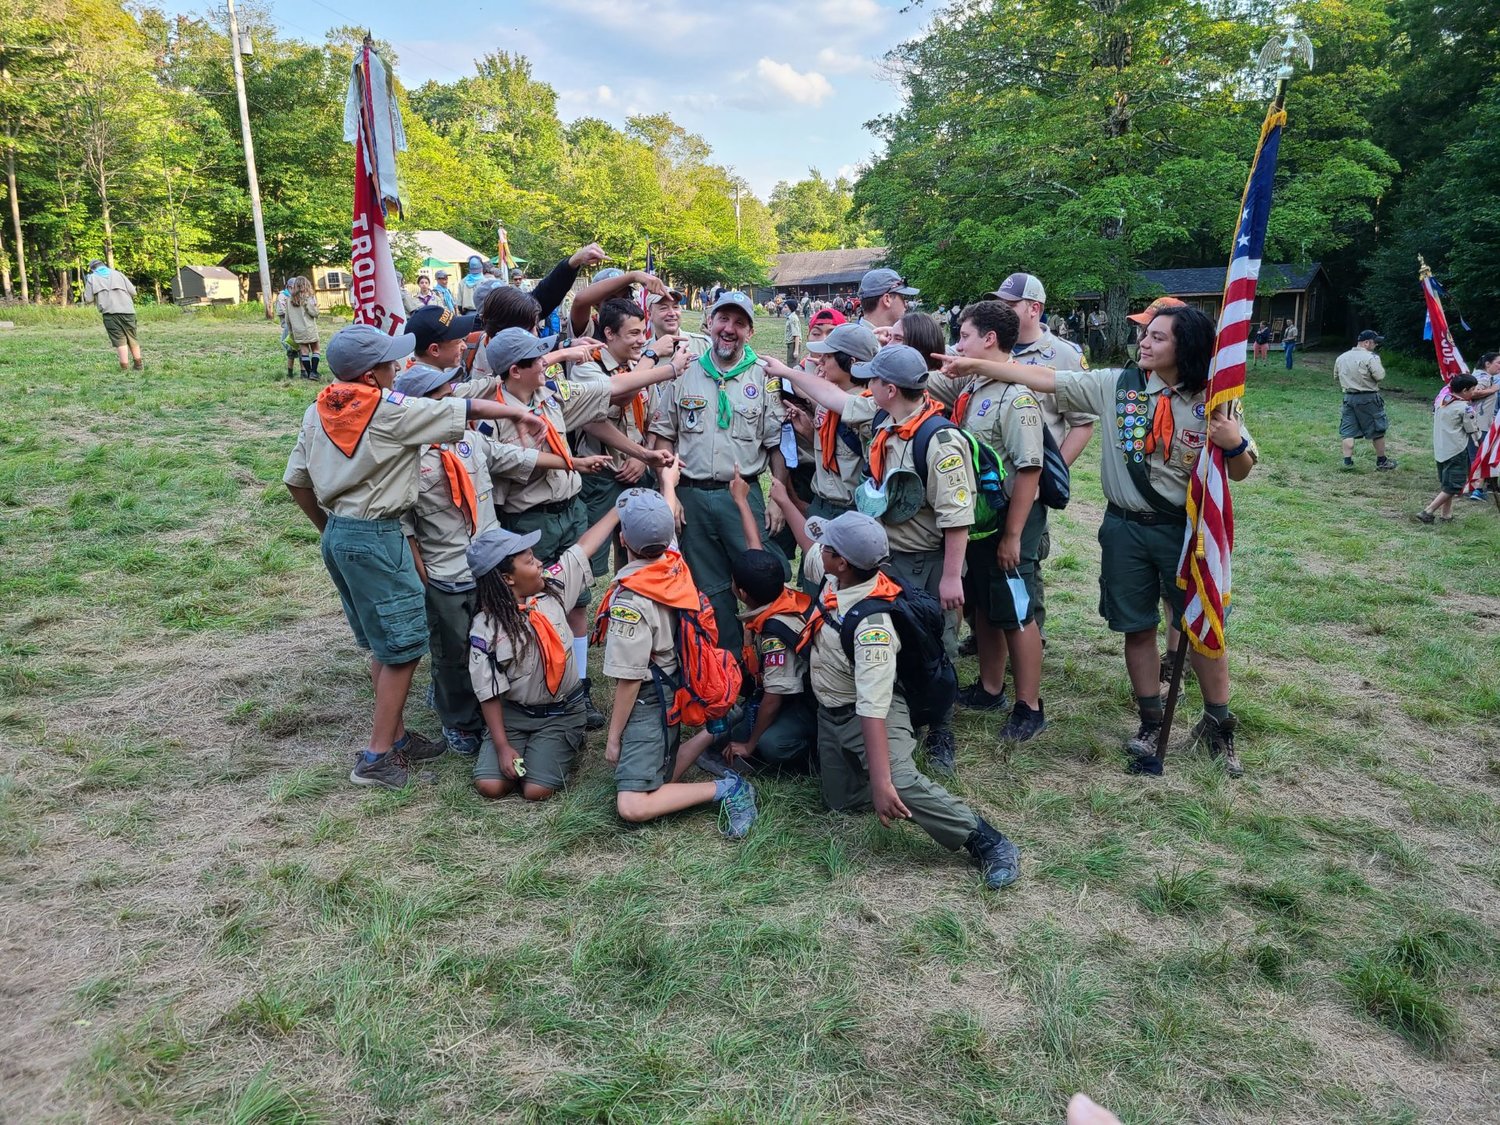 Scoutmaster Joseph Canzoneri's wisdom and guidance will be deeply missed by his troop.